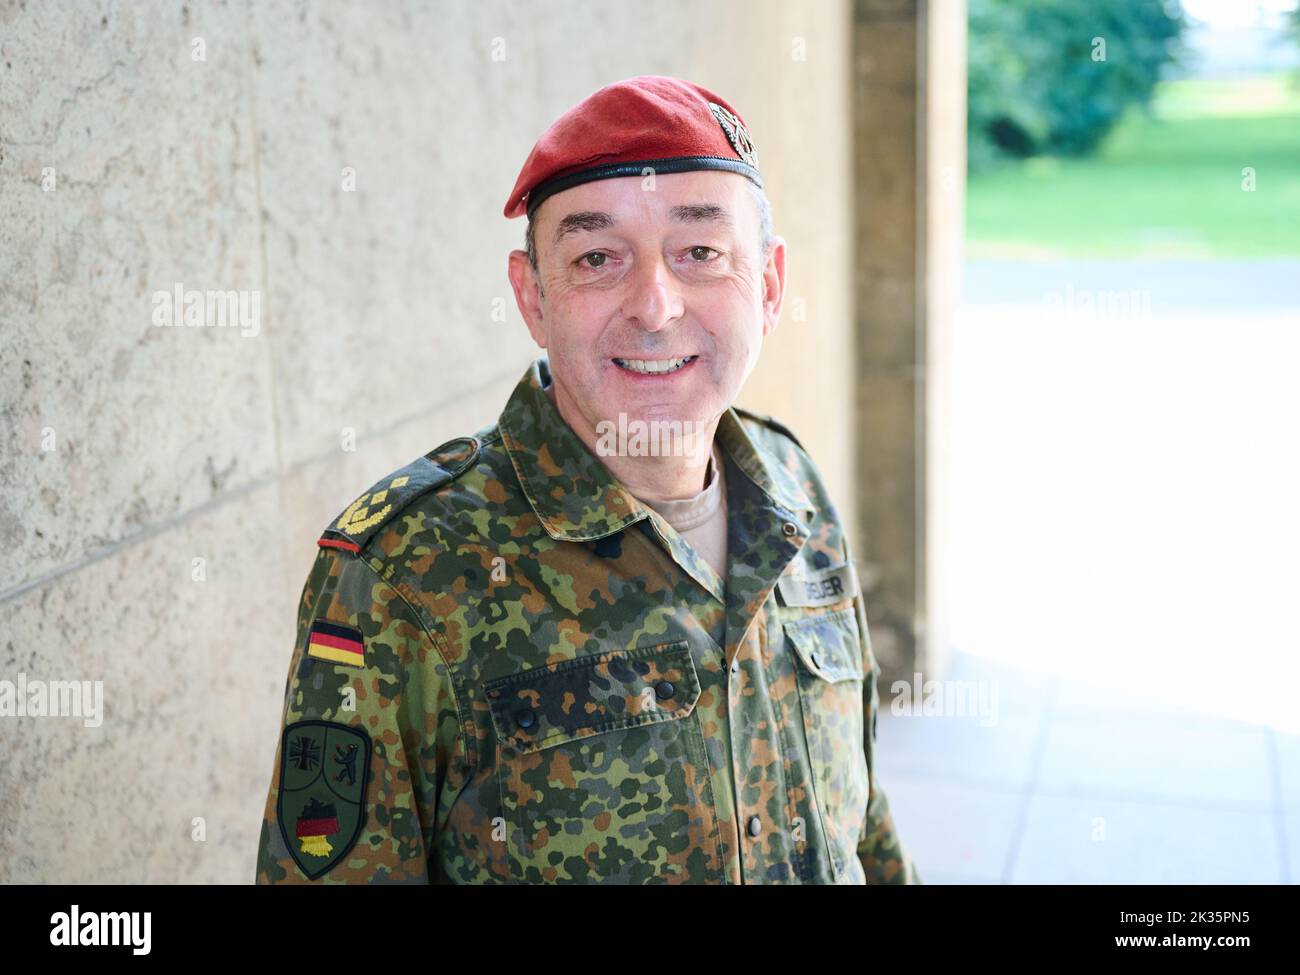 Berlin, Germany. 23rd Sep, 2022. Lieutenant General Carsten Breuer, commander of the new Territorial Command, stands in the Julius Leber Barracks. Following the Russian attack on Ukraine, the forces are being refocused on national and alliance defense. The new command has responsibility for operational command of forces - including the Army, Air Force, Navy, Medical Service and Cyber/Information Space - at Homeland Security. Credit: Annette Riedl/dpa/Alamy Live News Stock Photo